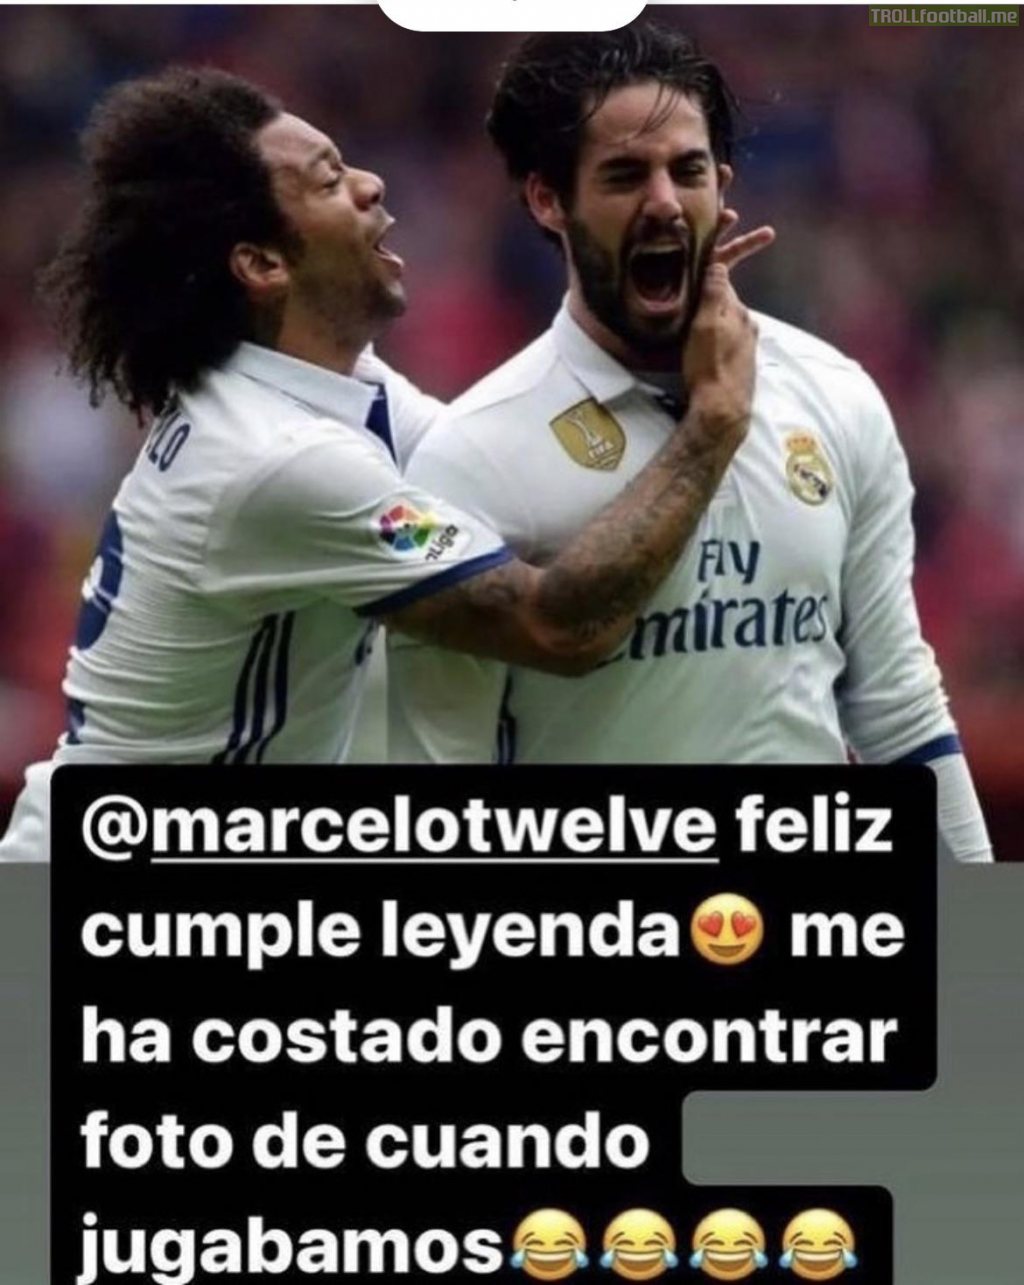 Real Madrid’s Isco wishes Marcelo a happy 34th birthday: “Happy Birthday, legend! It was difficult for me to find a photo of us actually playing!”